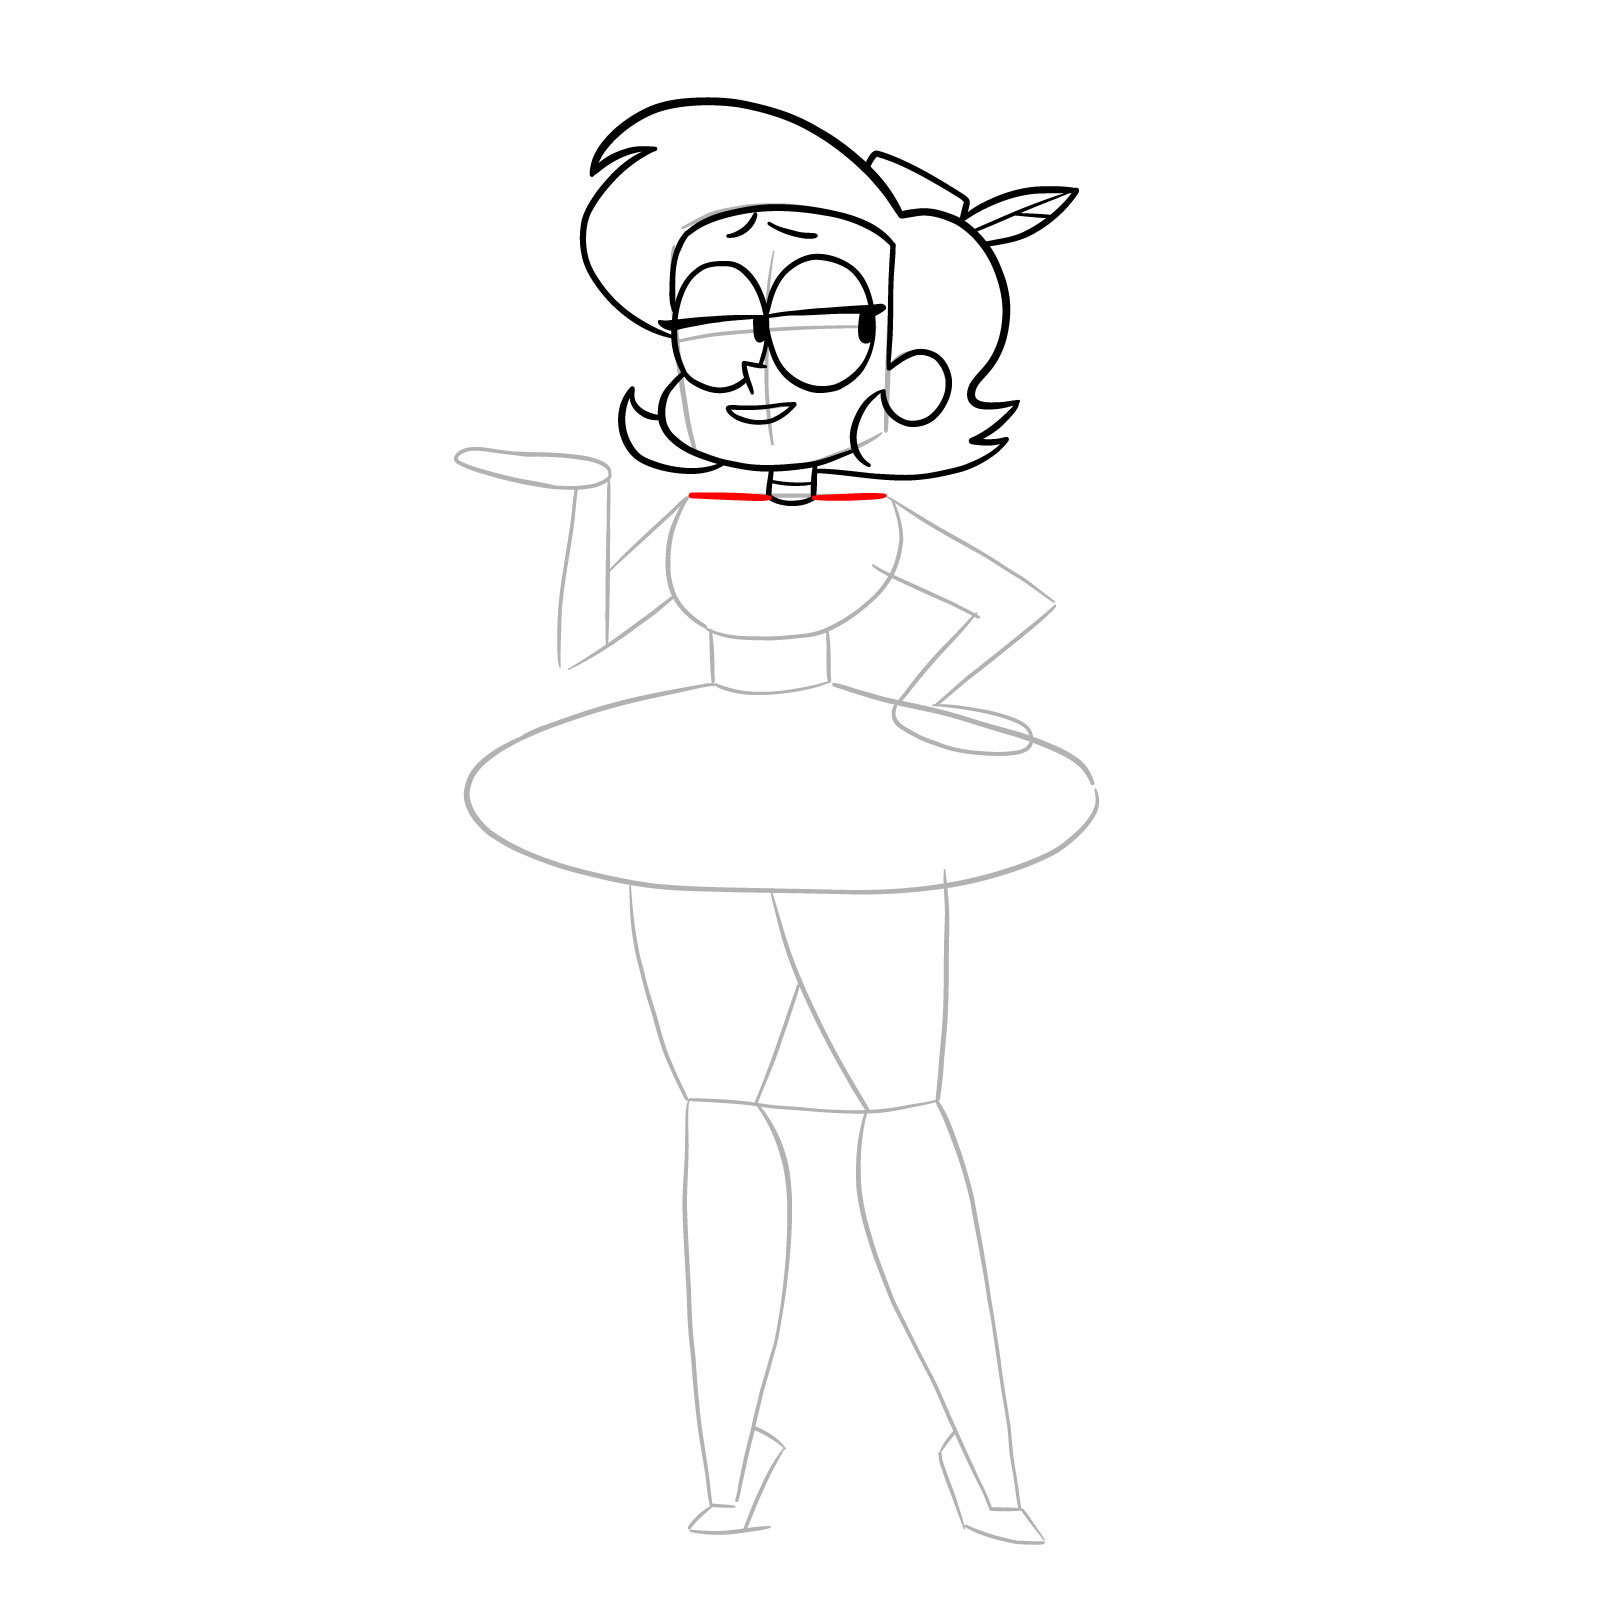 How to draw Elodie from OK K.O.! - step 15